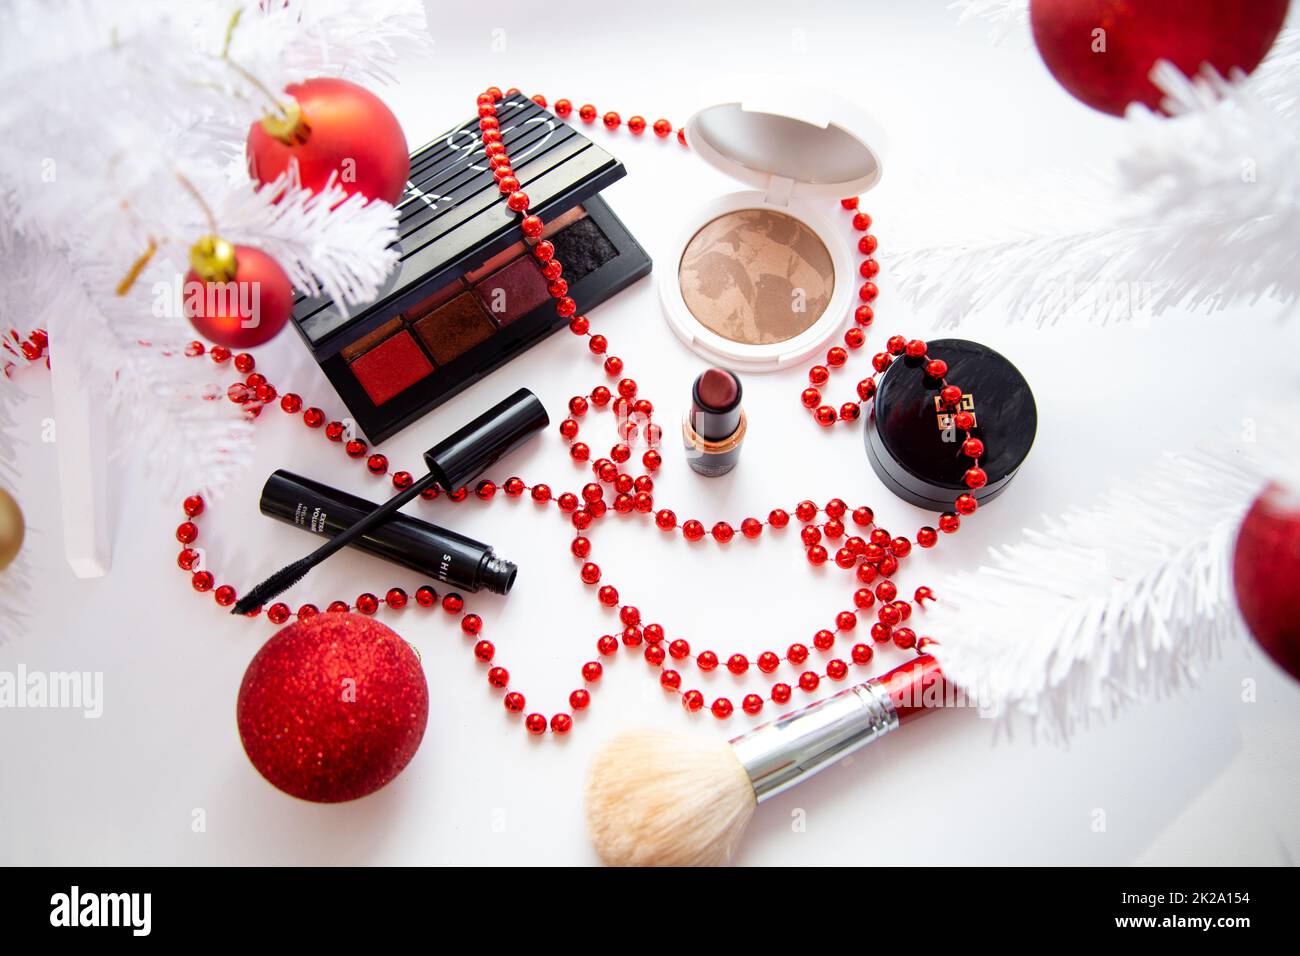 Powder and bronzer, eye shadow, lipstick, blush and a brush of different brands lie on a white background surrounded by white fluffy branches of a Christmas tree and red Christmas balls. Stock Photo